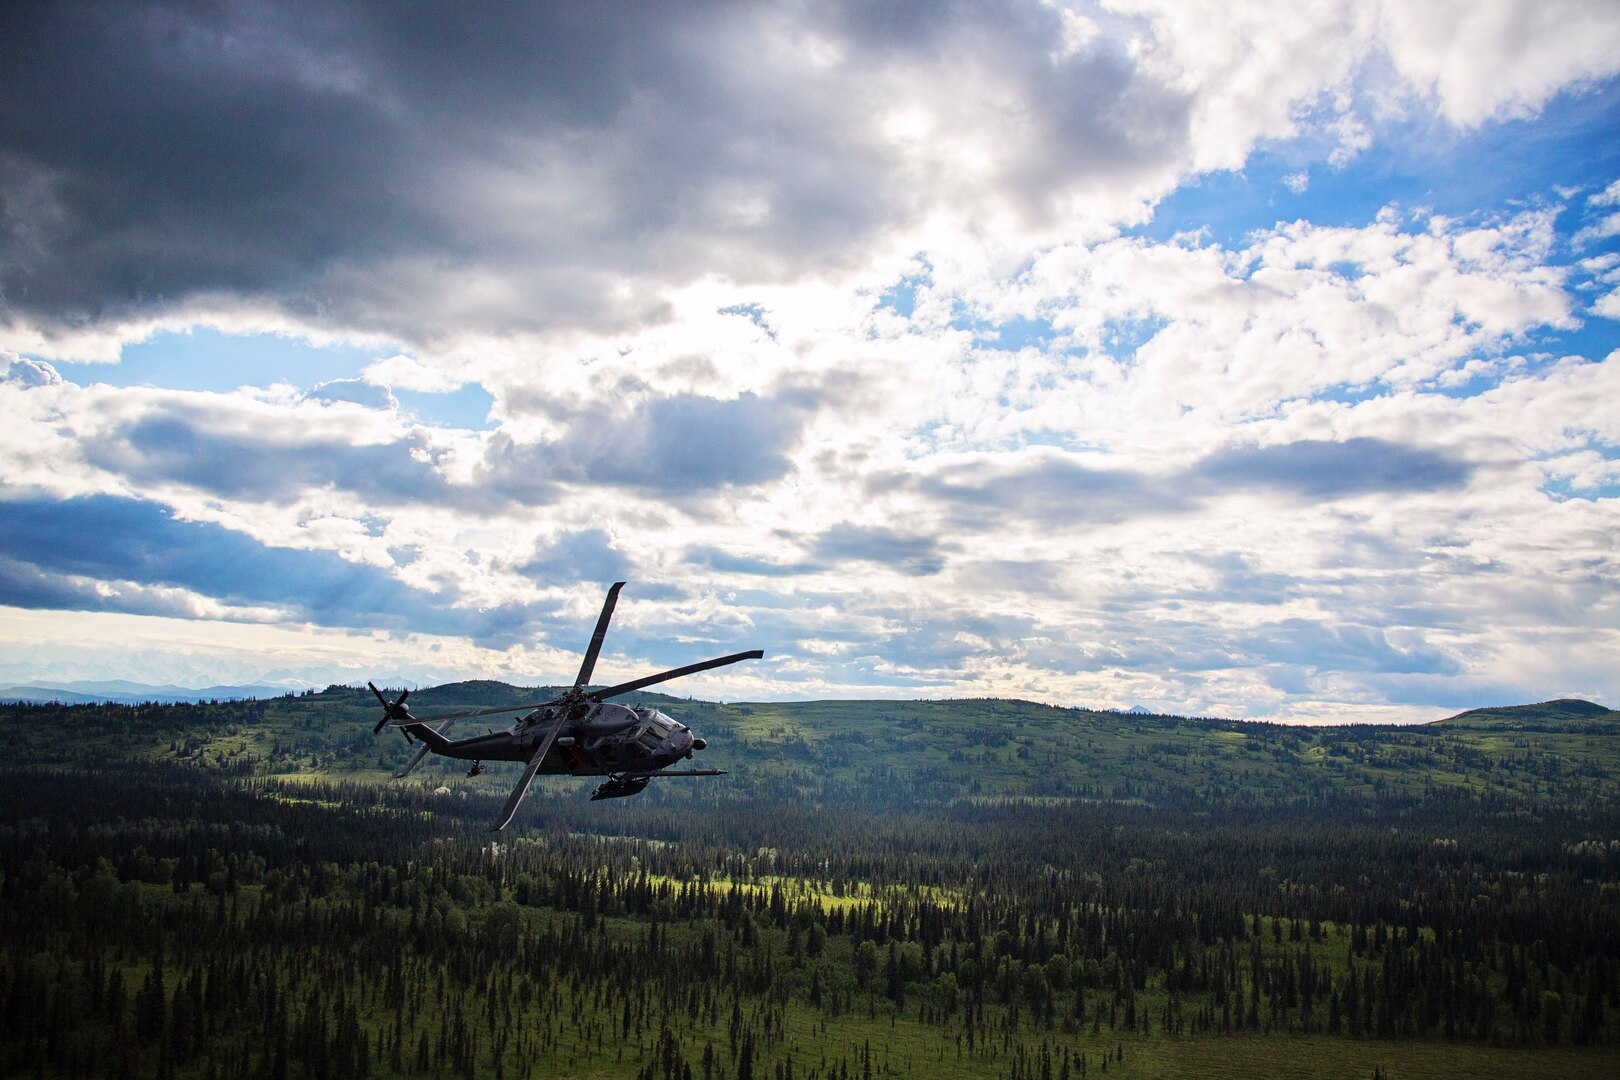 An Alaska Air National Guard HH-60 Pave Hawk helicopter from the 210th Rescue Squadron flies on a training flight July 10 in south-central Alaska. The hoist capabilities of the Pave Hawk helicopters provide the rescue assets with the ability to conduct rescue missions in rugged terrain. 